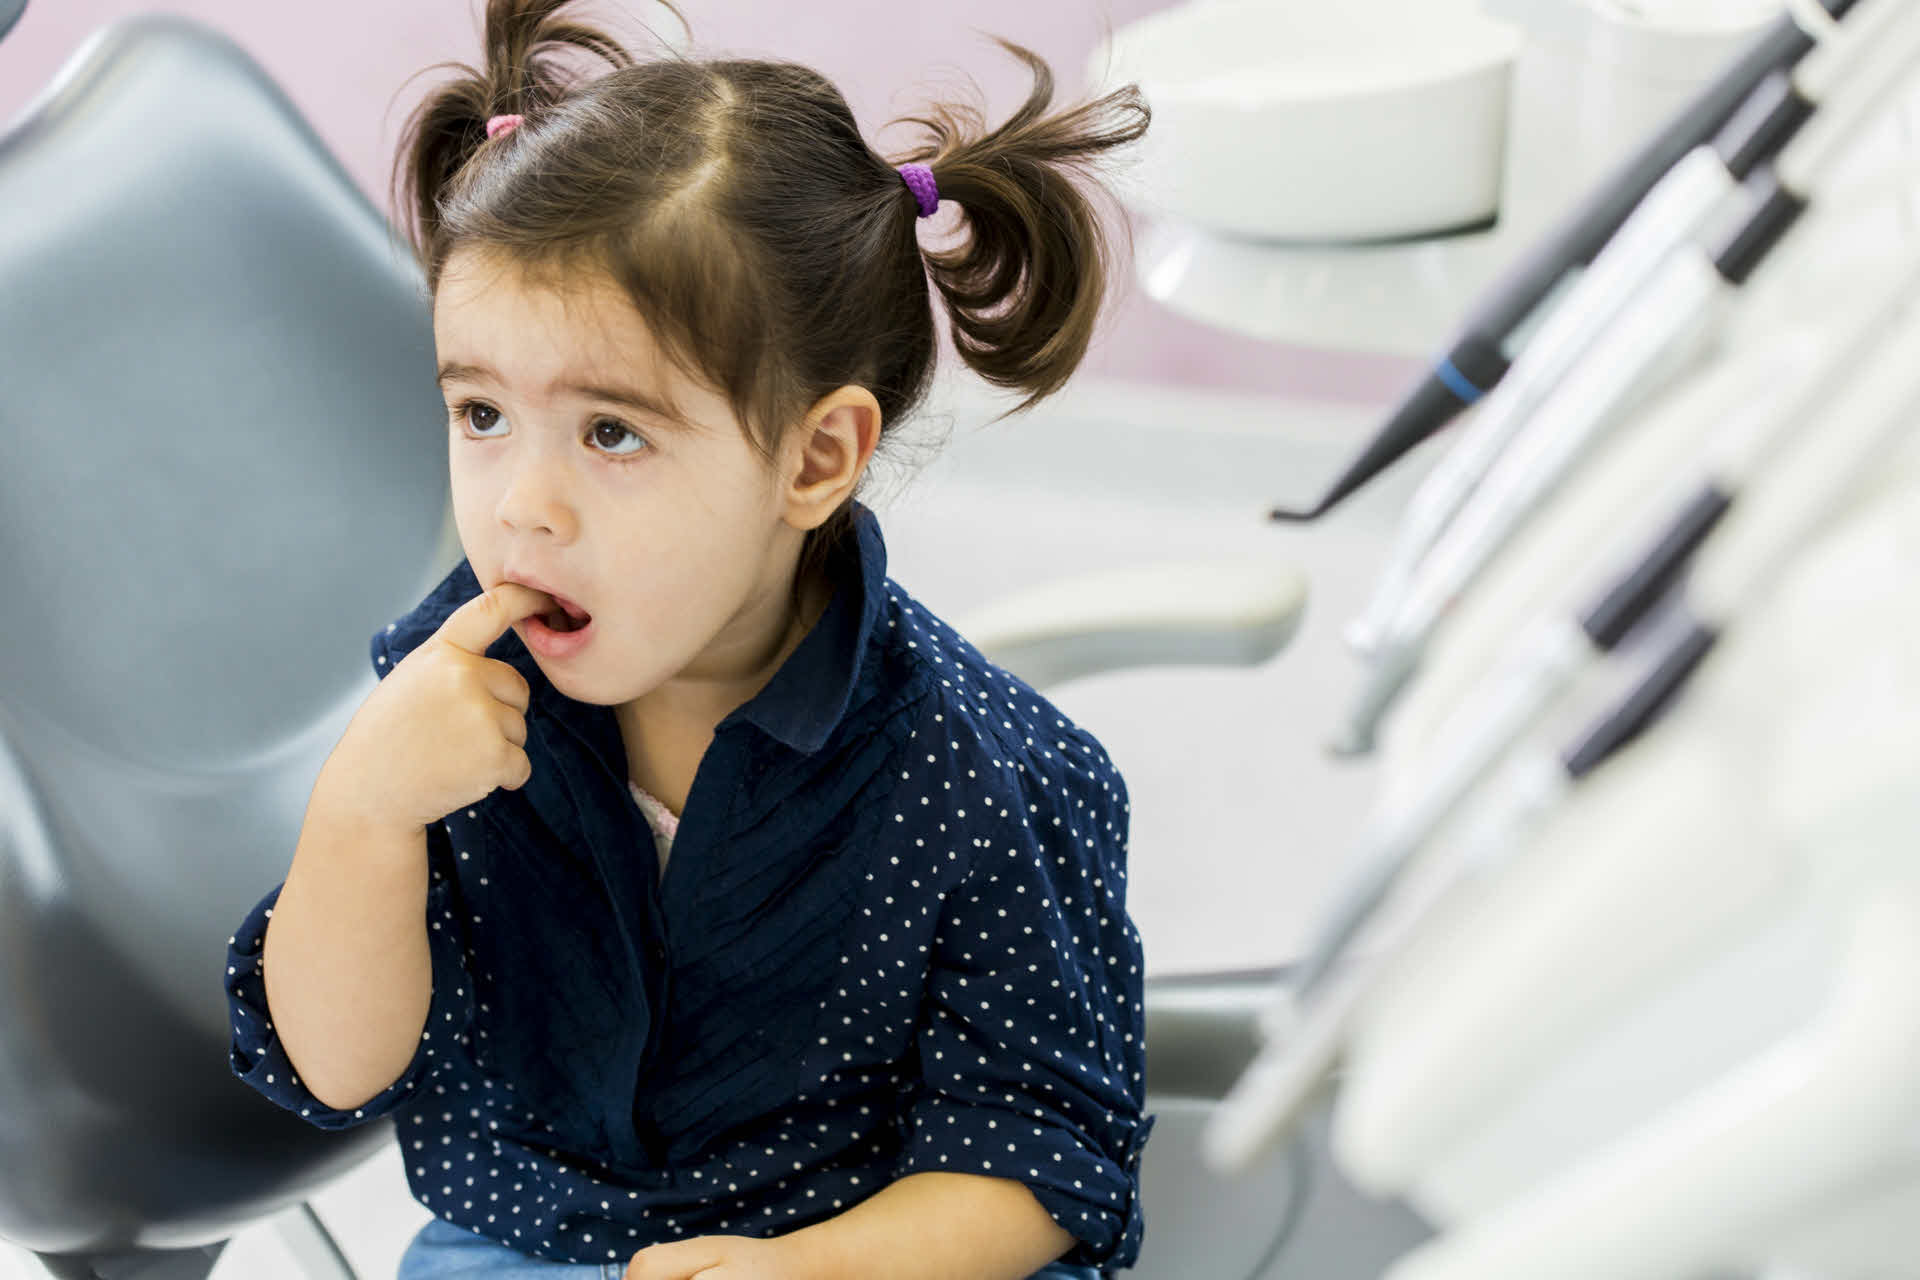 Questions about payment plans or insurance coverage for your dental work? We have answers, explore our frequently asked questions below, and if you don't find an answer just call your dentist office.